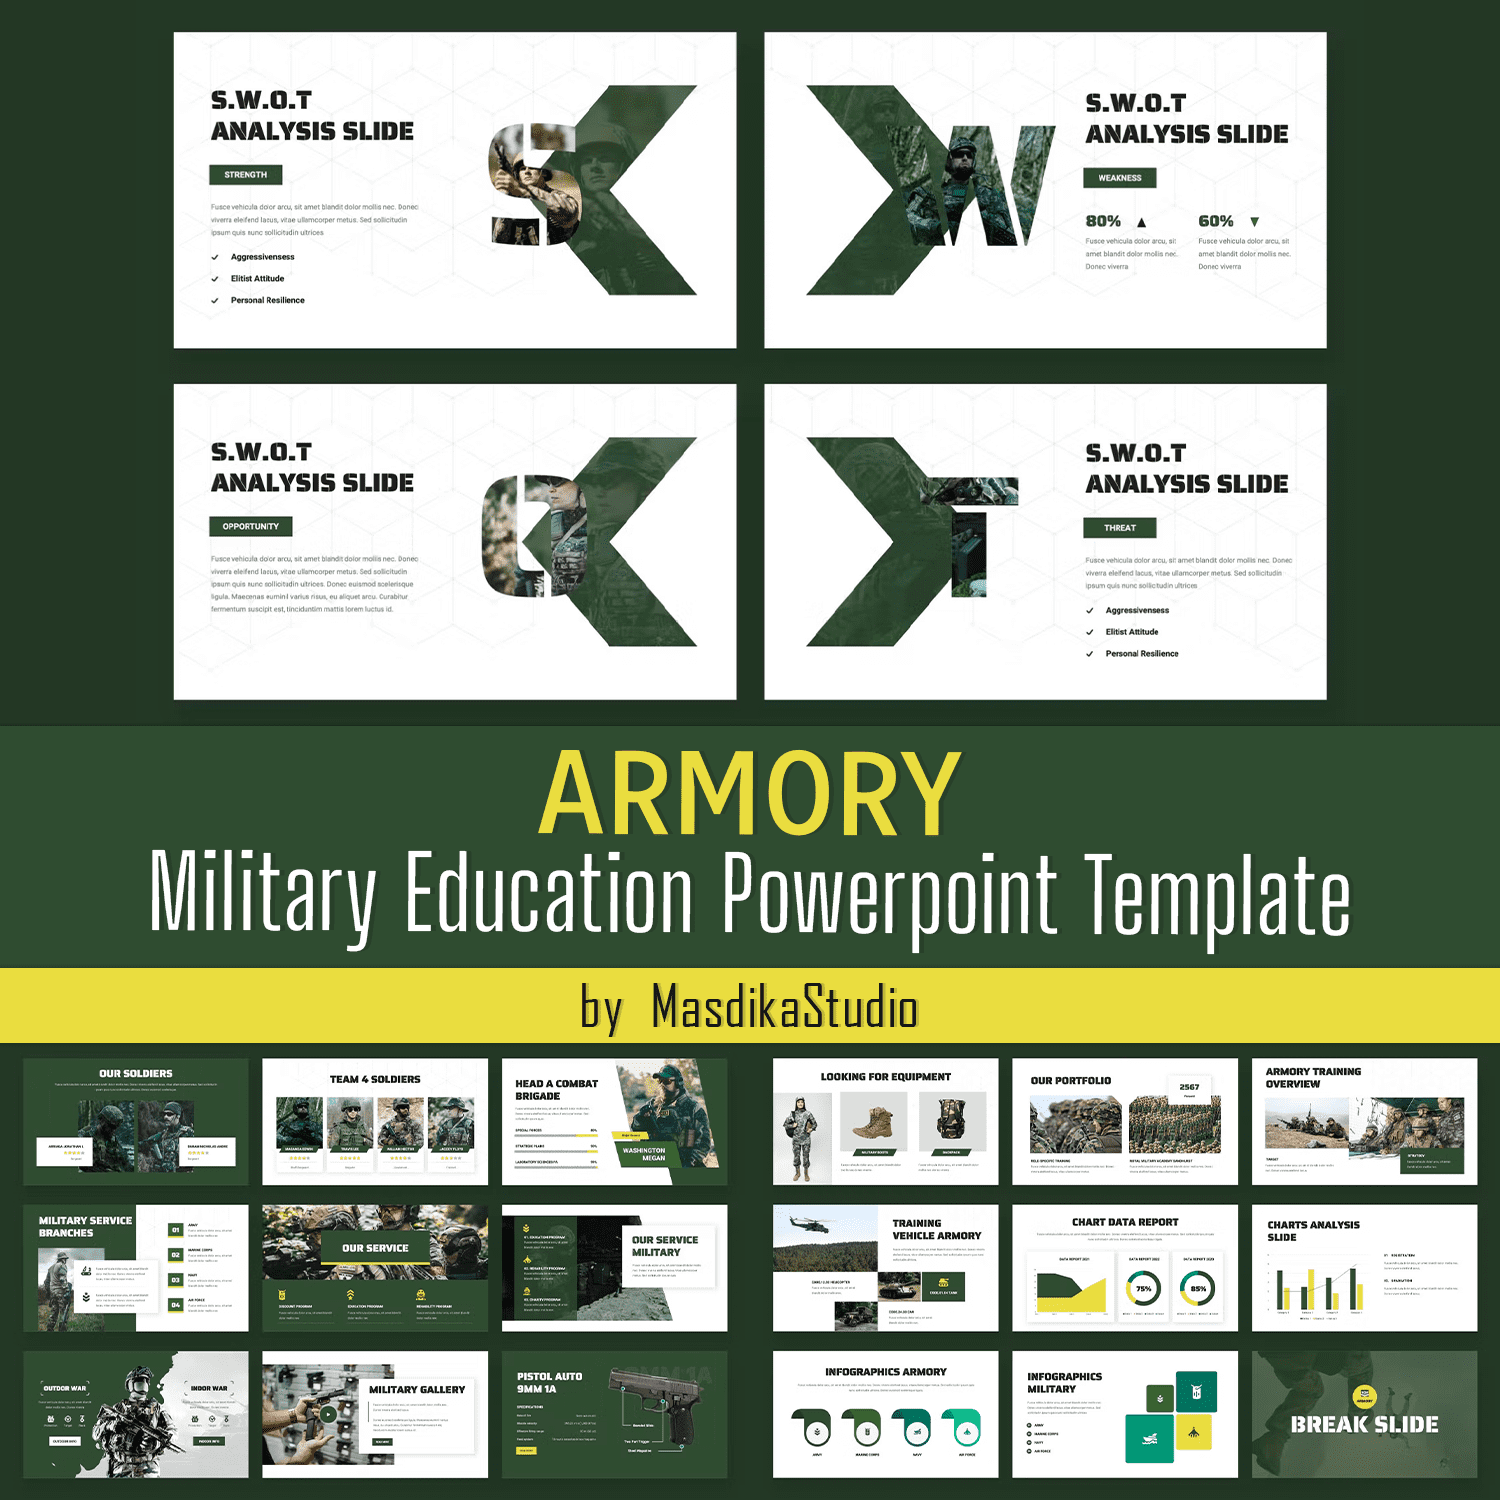 Cover - yellow lettering "ARMORY" and white lettering "Military Education Powerpoint Template" and different presentation templates on a dark green background.